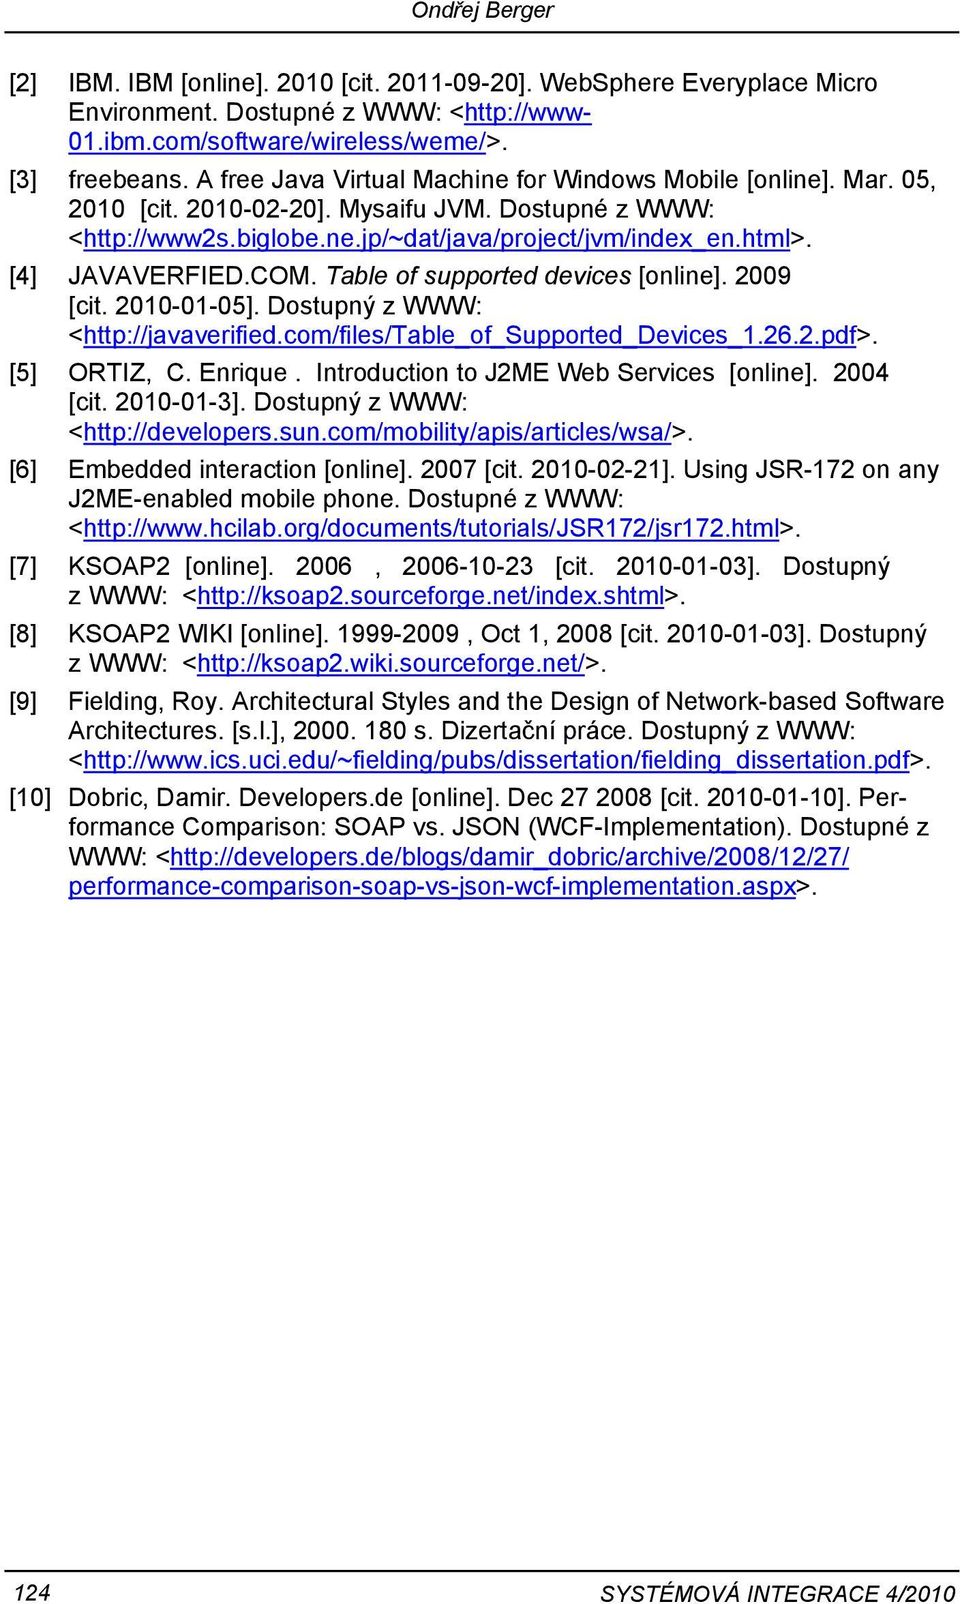 [4] JAVAVERFIED.COM. Table of supported devices [online]. 2009 [cit. 2010-01-05]. Dostupný z WWW: <http://javaverified.com/files/table_of_supported_devices_1.26.2.pdf>. [5] ORTIZ, C. Enrique.